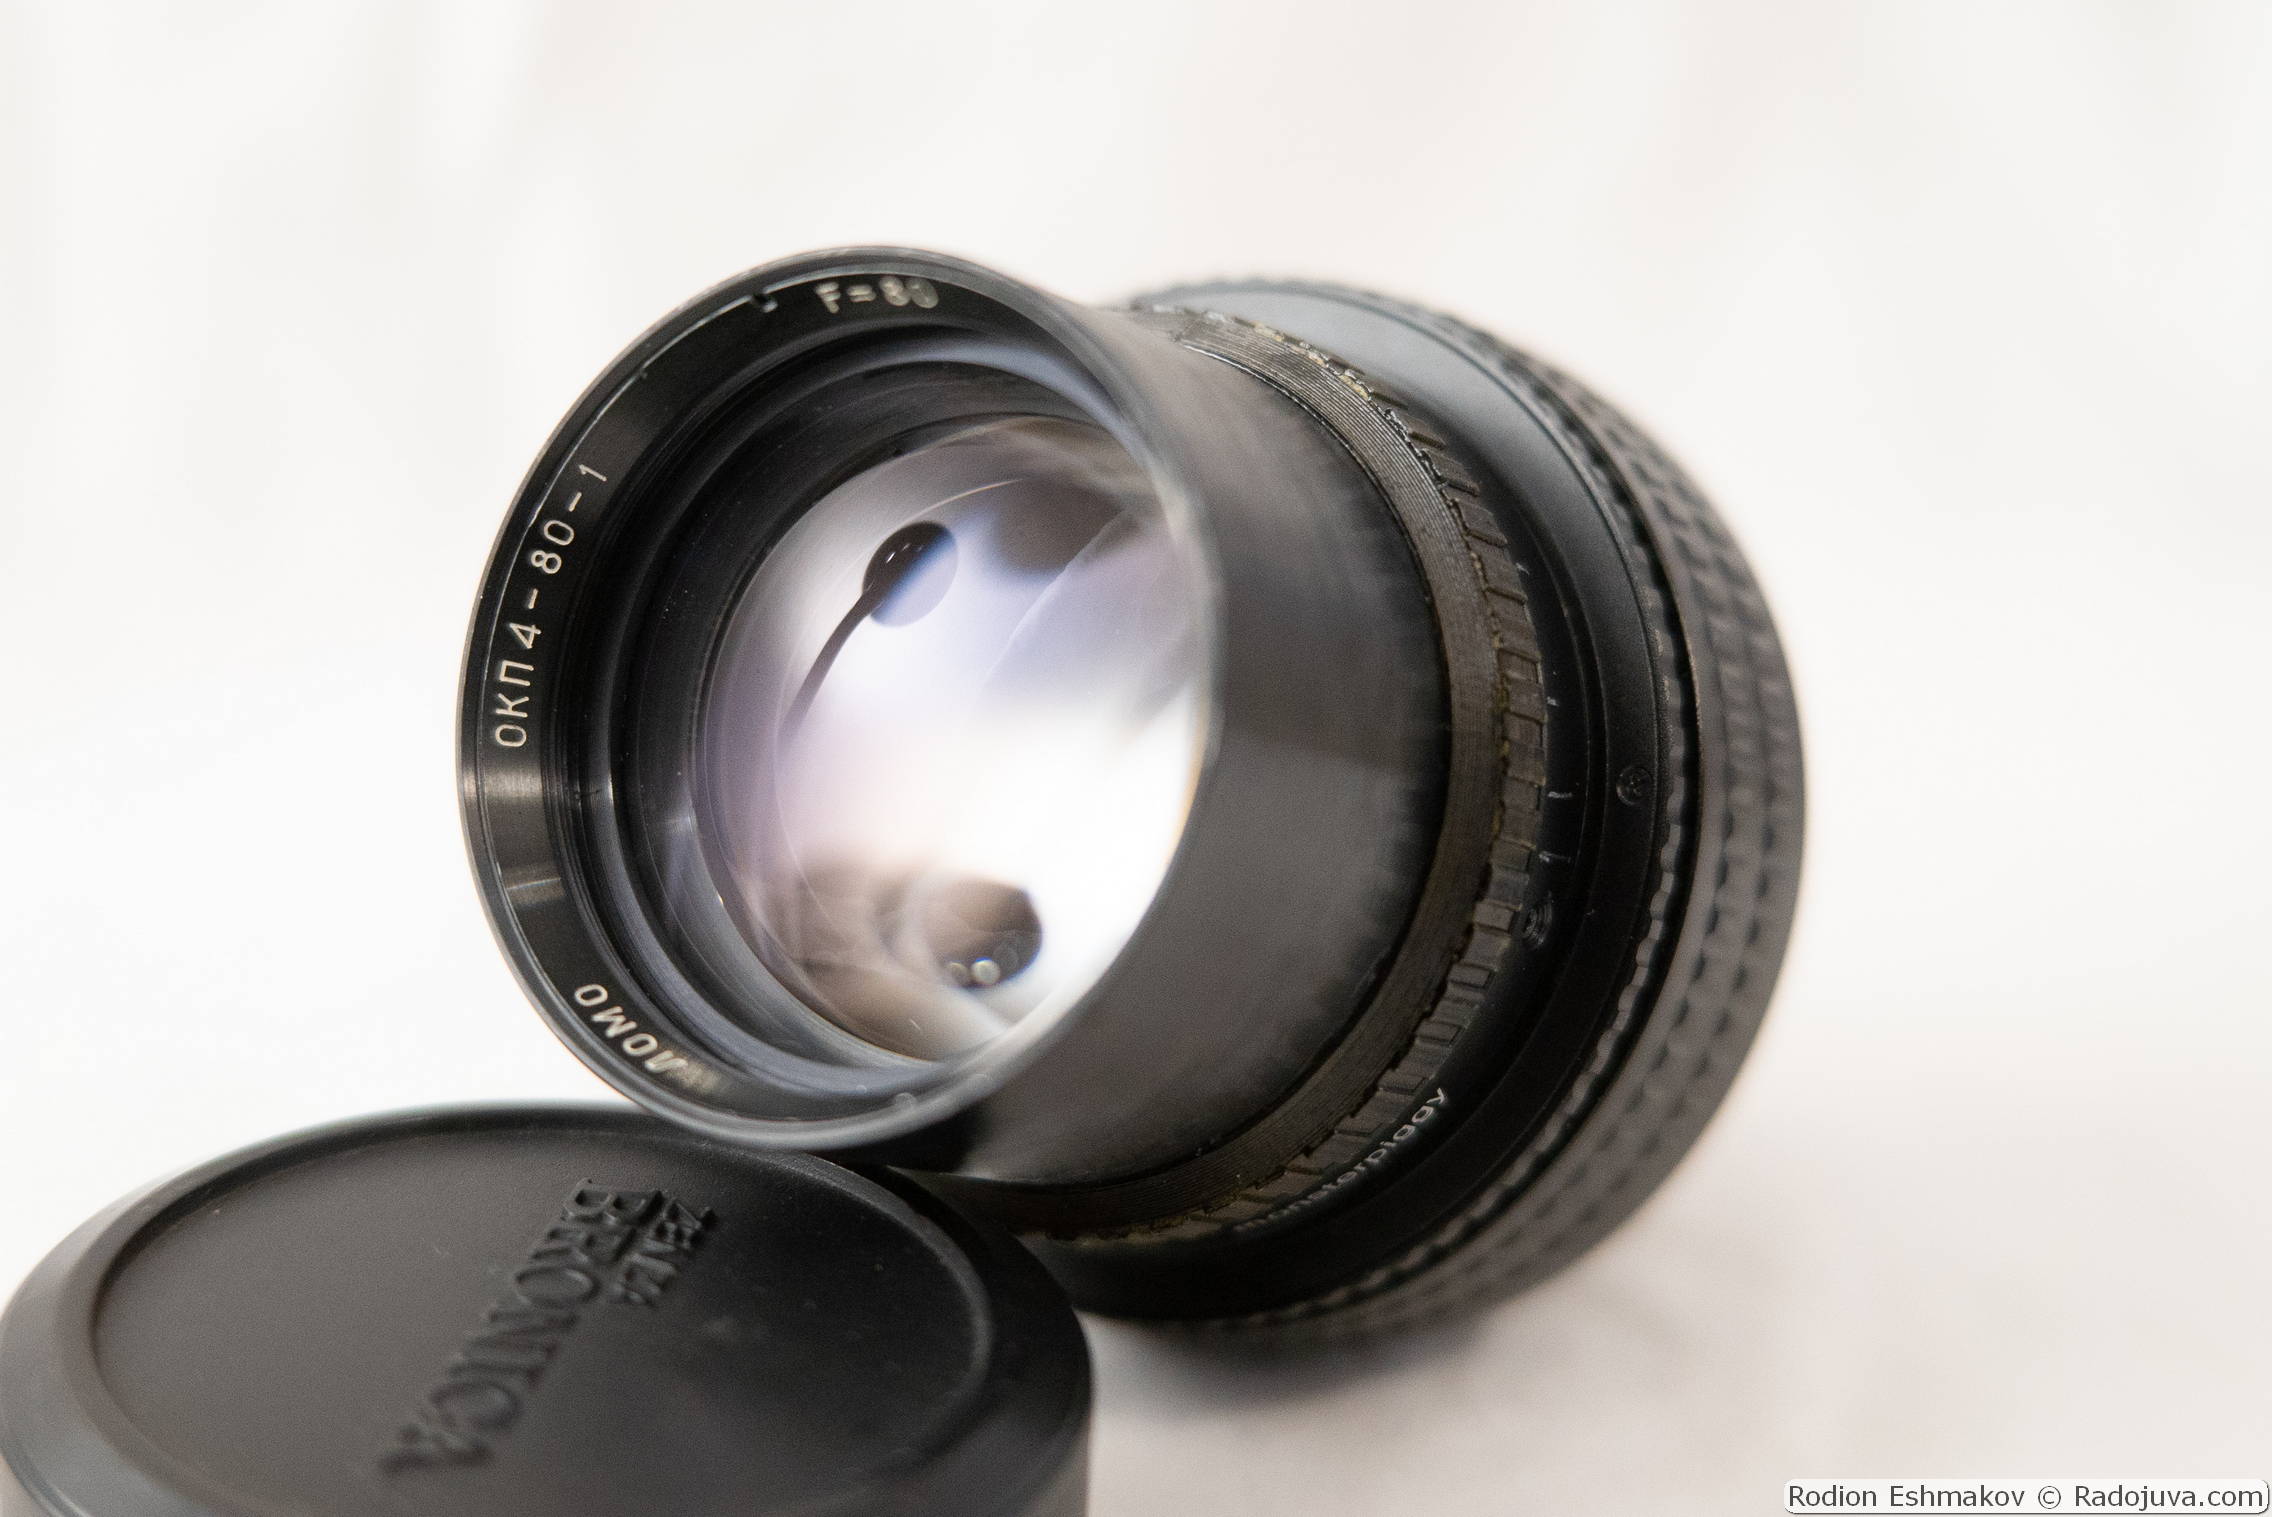 View of the adapted lens from the side of the front lens